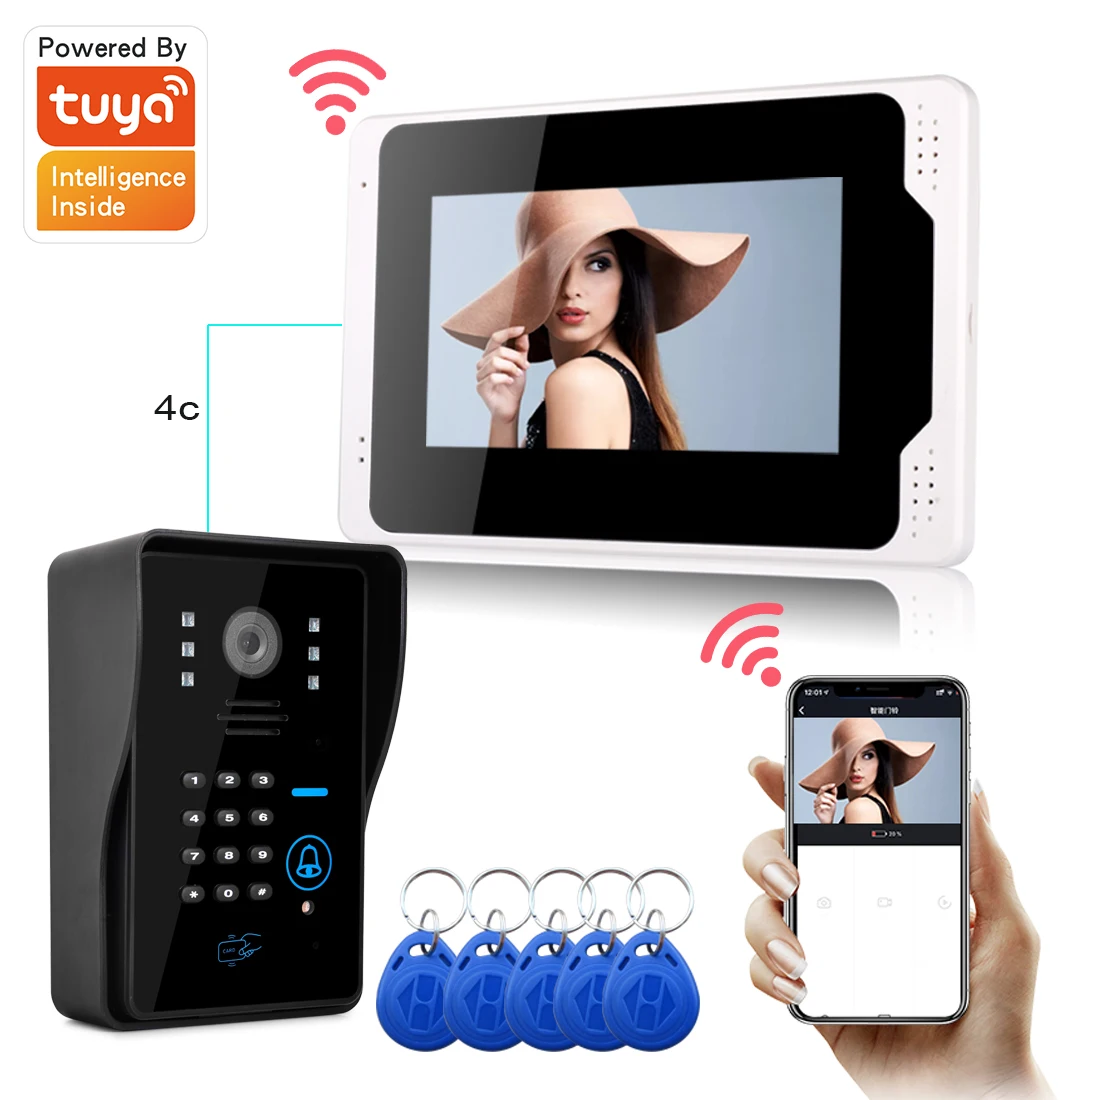 

Tuya 1080P 7inch Color Touch Screen Monitor Wireless Wifi Video Doorbell Doorphone Smart Home Intercom Kit Access Control System